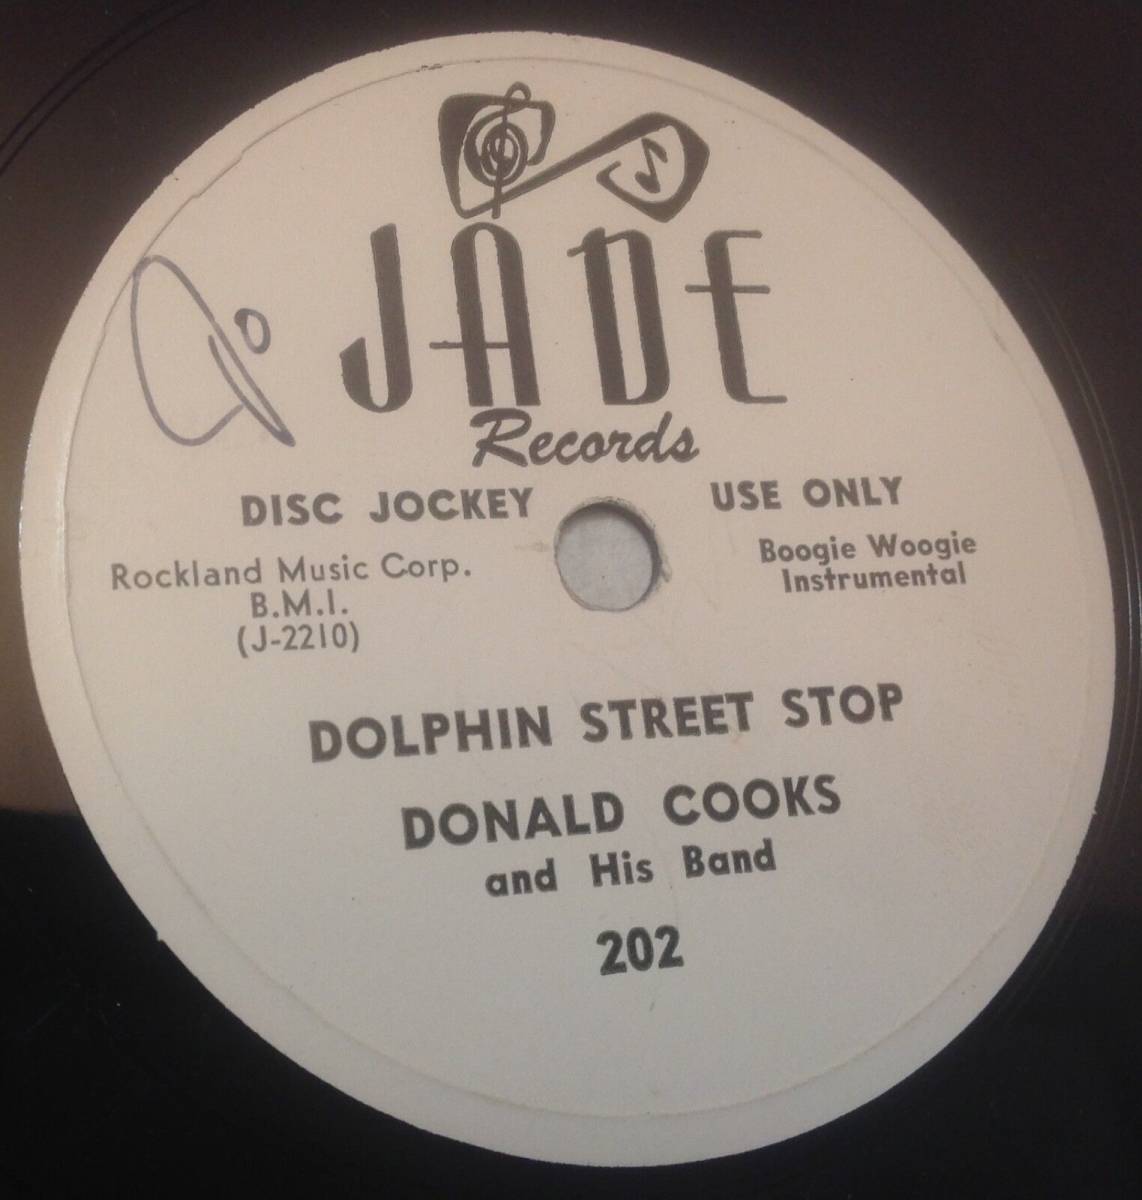 BLUES-JADE 202-Donald Cooks *****PROMO*****and レア 78 RPM 海外 即決